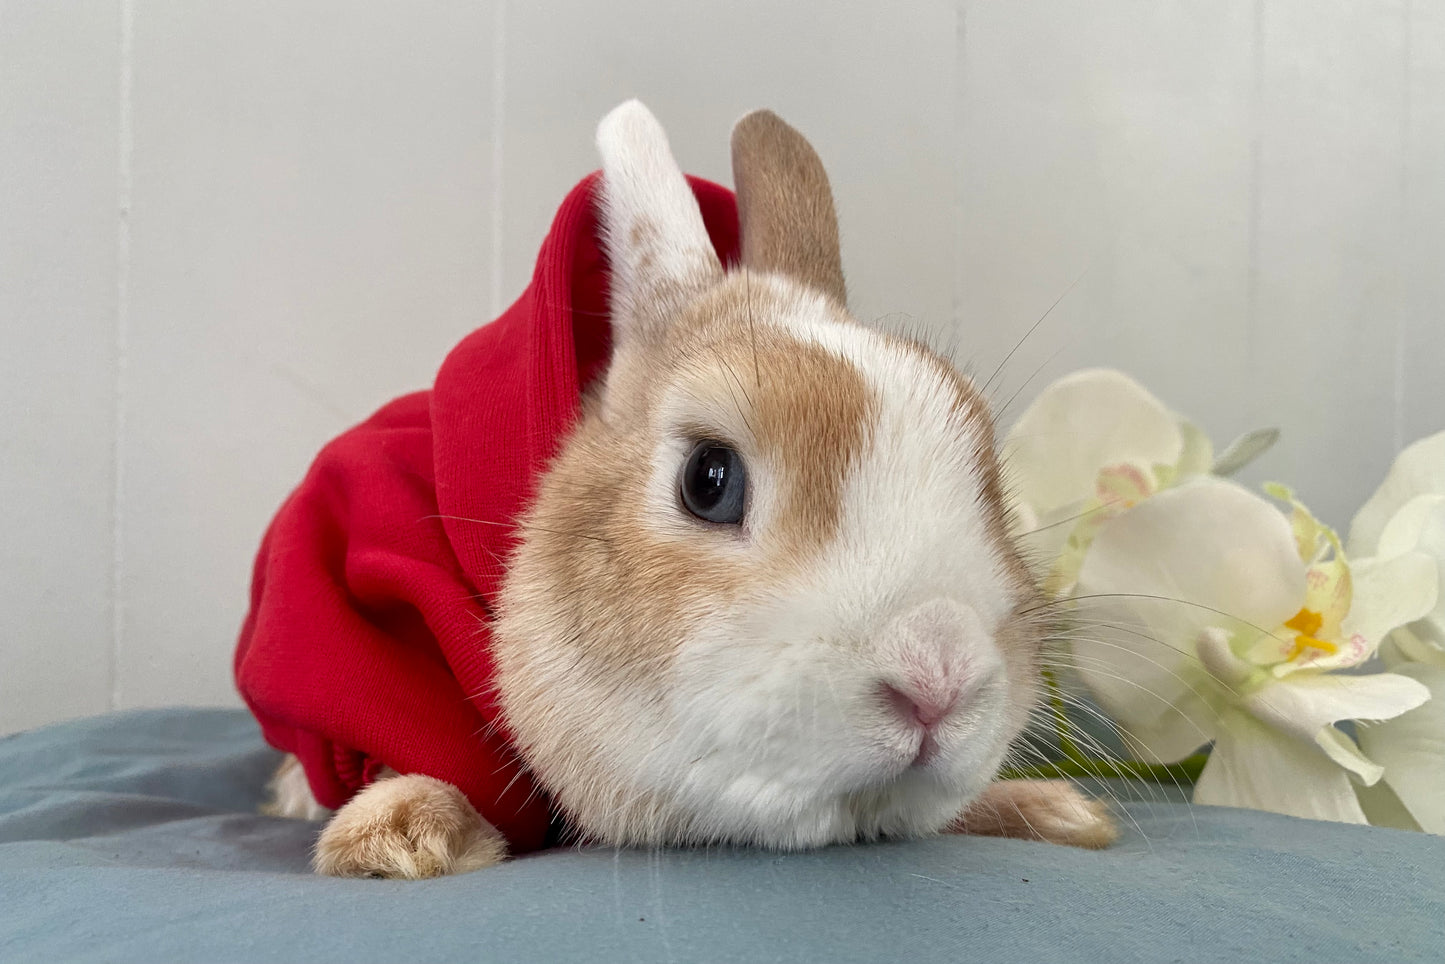 Hoodie pour lapin